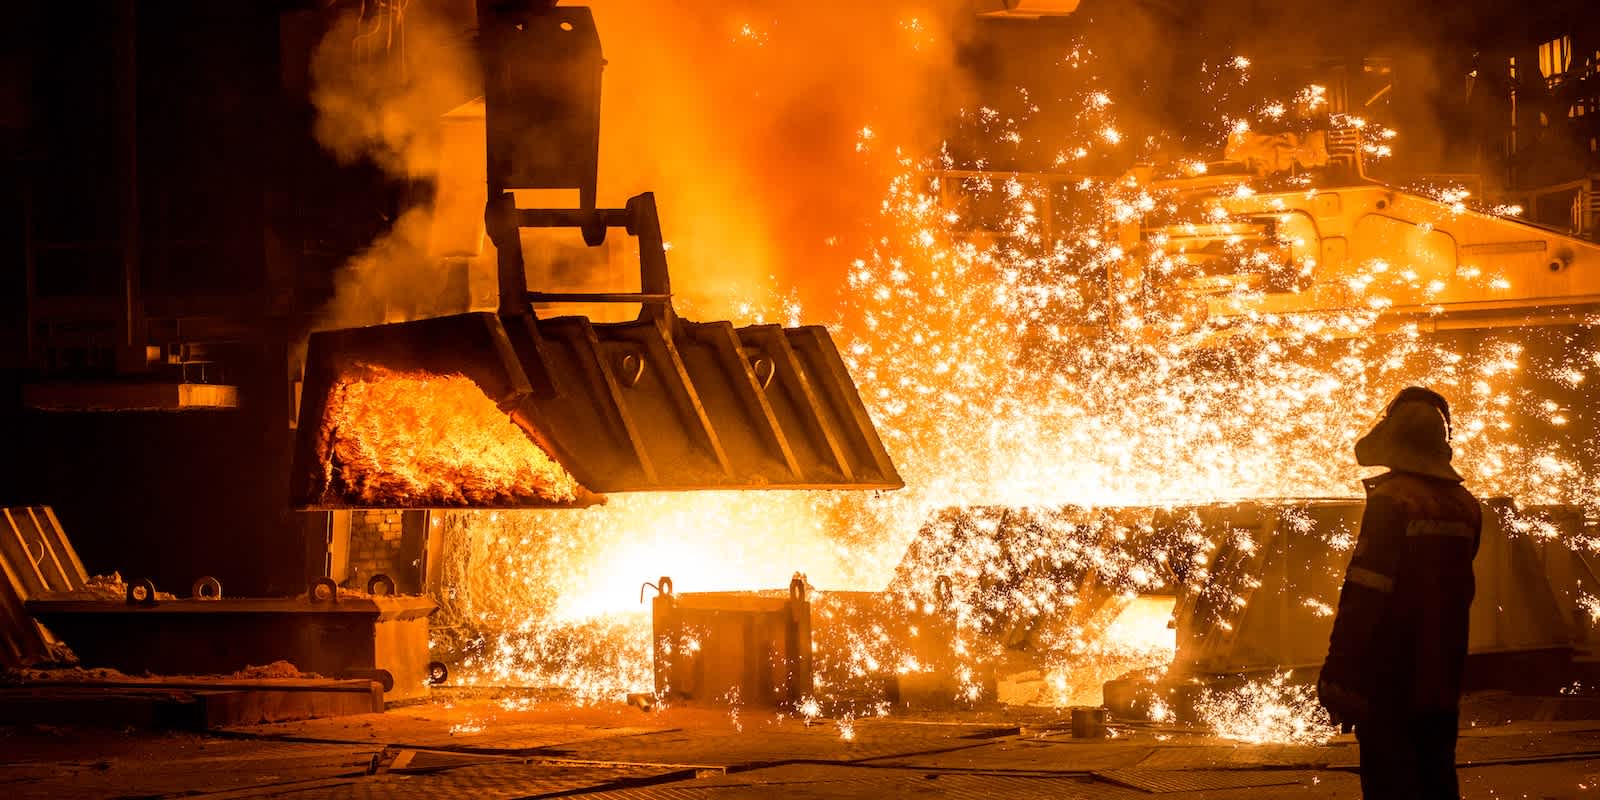 Steel being produced in a blast furnace foundry